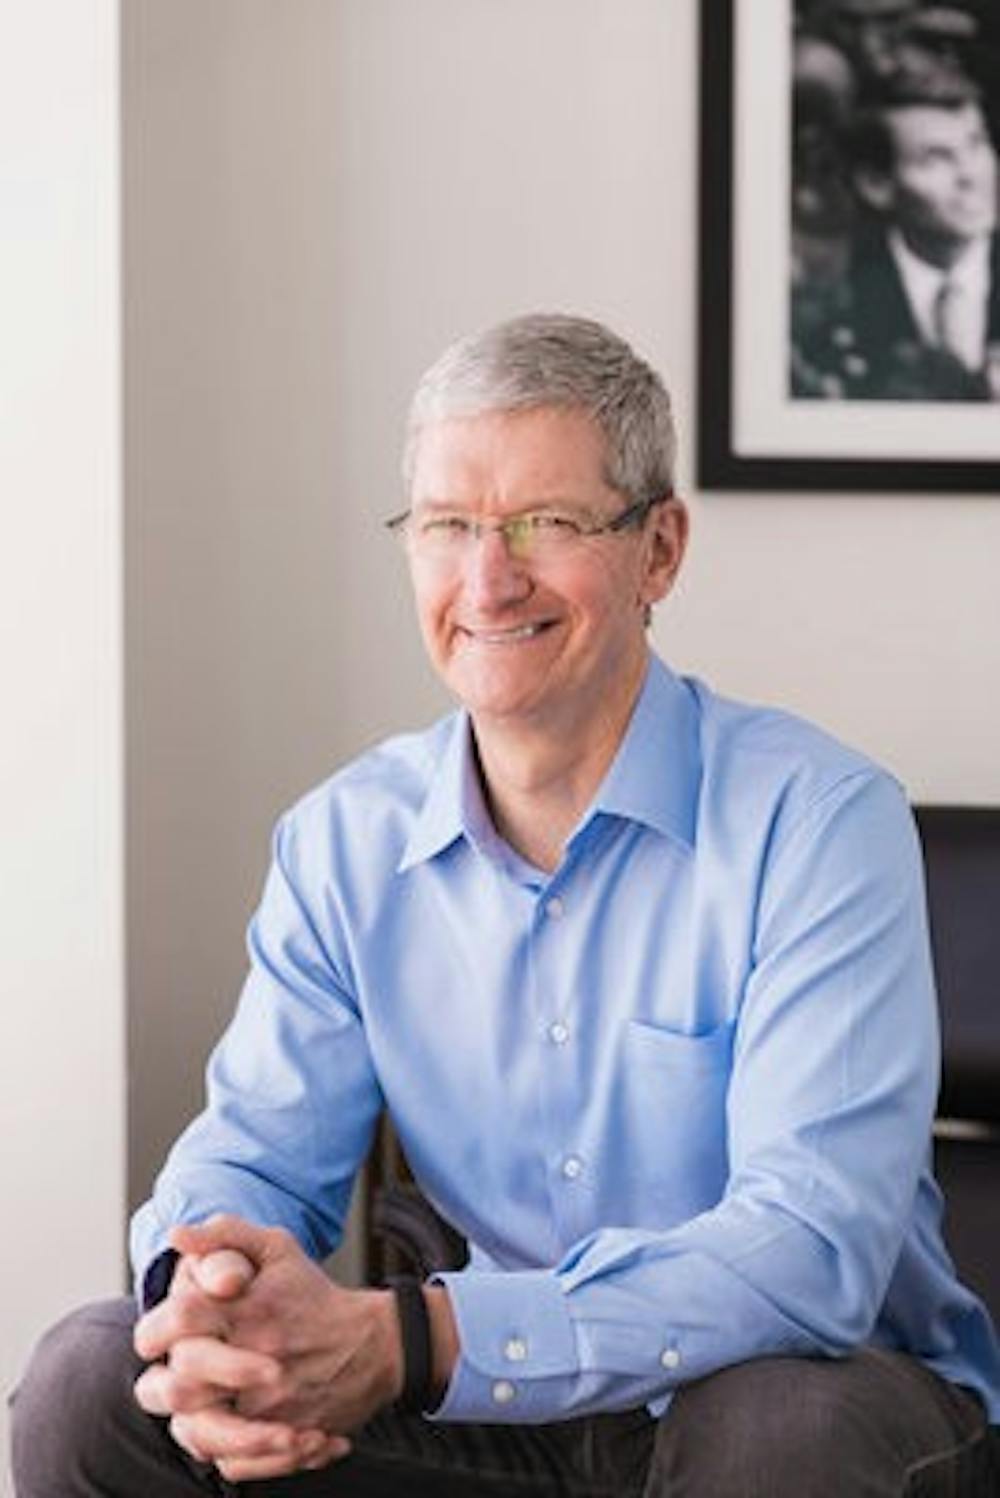 Tim Cook (Photo contributed by the Auburn Alumni Association)